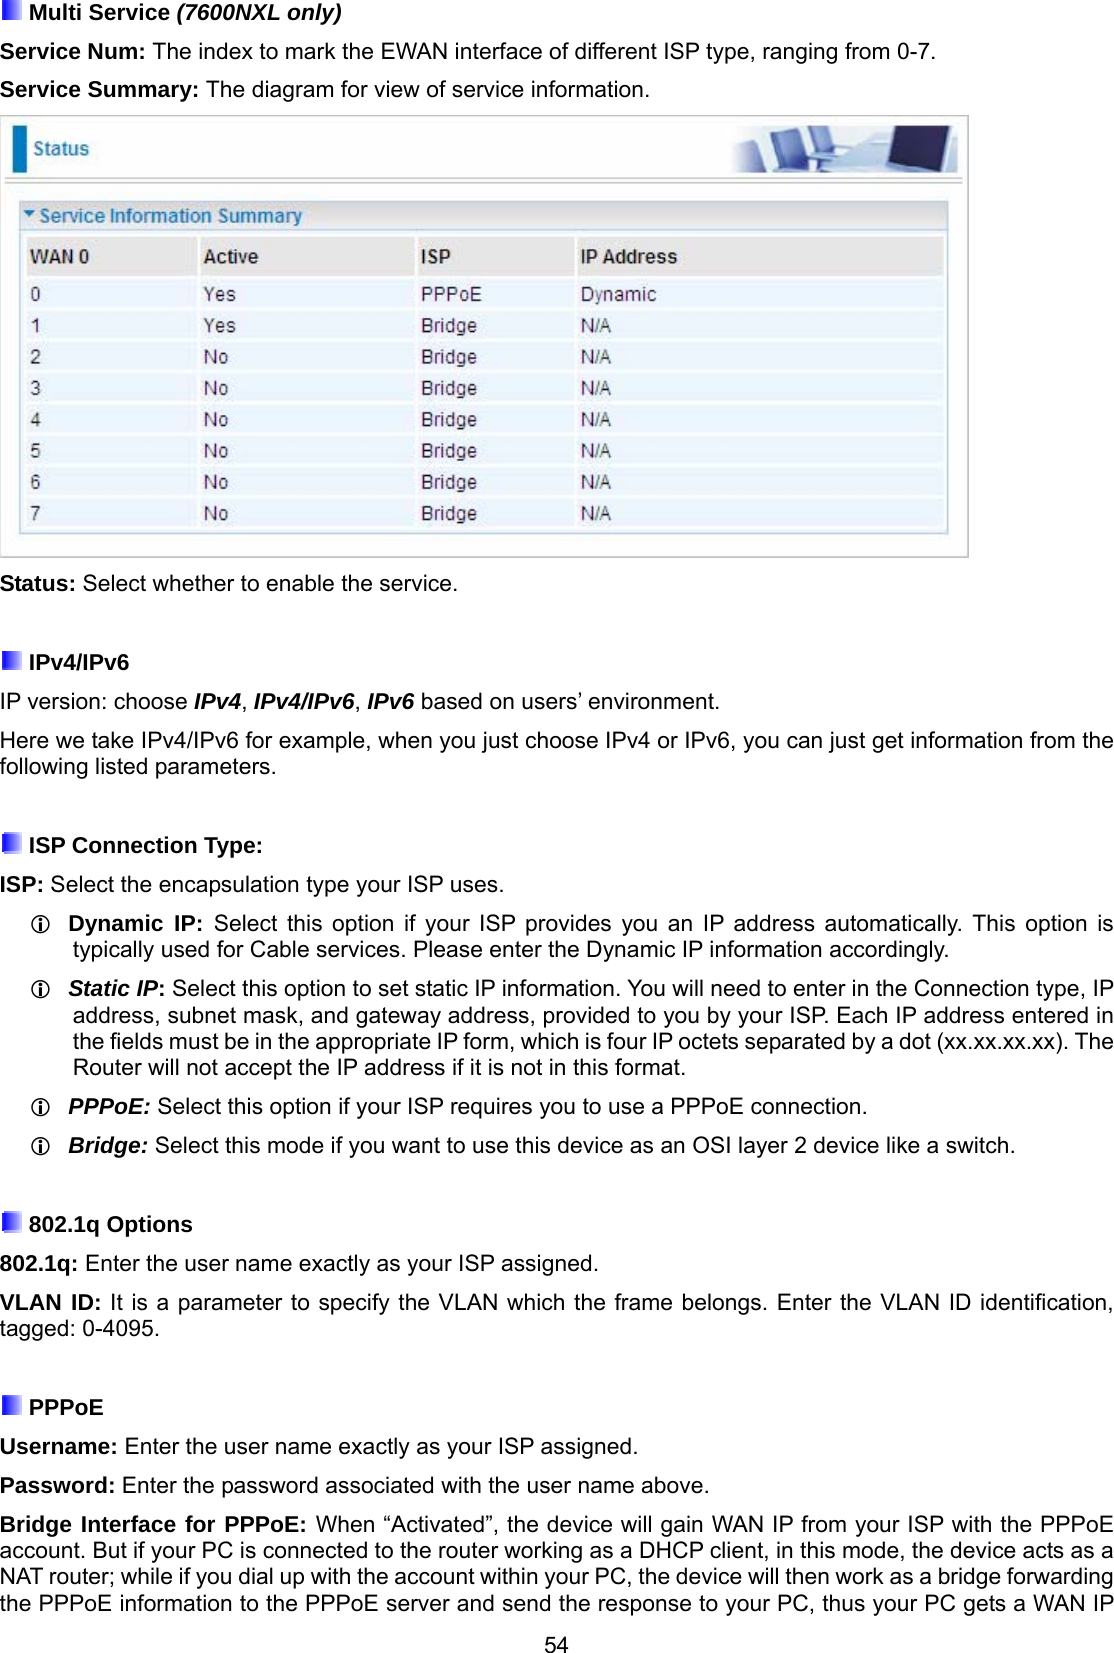 54  Multi Service (7600NXL only) Service Num: The index to mark the EWAN interface of different ISP type, ranging from 0-7. Service Summary: The diagram for view of service information.  Status: Select whether to enable the service.   IPv4/IPv6 IP version: choose IPv4, IPv4/IPv6, IPv6 based on users’ environment. Here we take IPv4/IPv6 for example, when you just choose IPv4 or IPv6, you can just get information from the following listed parameters.   ISP Connection Type:  ISP: Select the encapsulation type your ISP uses.   Dynamic IP: Select this option if your ISP provides you an IP address automatically. This option is typically used for Cable services. Please enter the Dynamic IP information accordingly.  Static IP: Select this option to set static IP information. You will need to enter in the Connection type, IP address, subnet mask, and gateway address, provided to you by your ISP. Each IP address entered in the fields must be in the appropriate IP form, which is four IP octets separated by a dot (xx.xx.xx.xx). The Router will not accept the IP address if it is not in this format.  PPPoE: Select this option if your ISP requires you to use a PPPoE connection.   Bridge: Select this mode if you want to use this device as an OSI layer 2 device like a switch.   802.1q Options 802.1q: Enter the user name exactly as your ISP assigned.  VLAN ID: It is a parameter to specify the VLAN which the frame belongs. Enter the VLAN ID identification, tagged: 0-4095.   PPPoE Username: Enter the user name exactly as your ISP assigned.  Password: Enter the password associated with the user name above. Bridge Interface for PPPoE: When “Activated”, the device will gain WAN IP from your ISP with the PPPoE account. But if your PC is connected to the router working as a DHCP client, in this mode, the device acts as a NAT router; while if you dial up with the account within your PC, the device will then work as a bridge forwarding the PPPoE information to the PPPoE server and send the response to your PC, thus your PC gets a WAN IP 